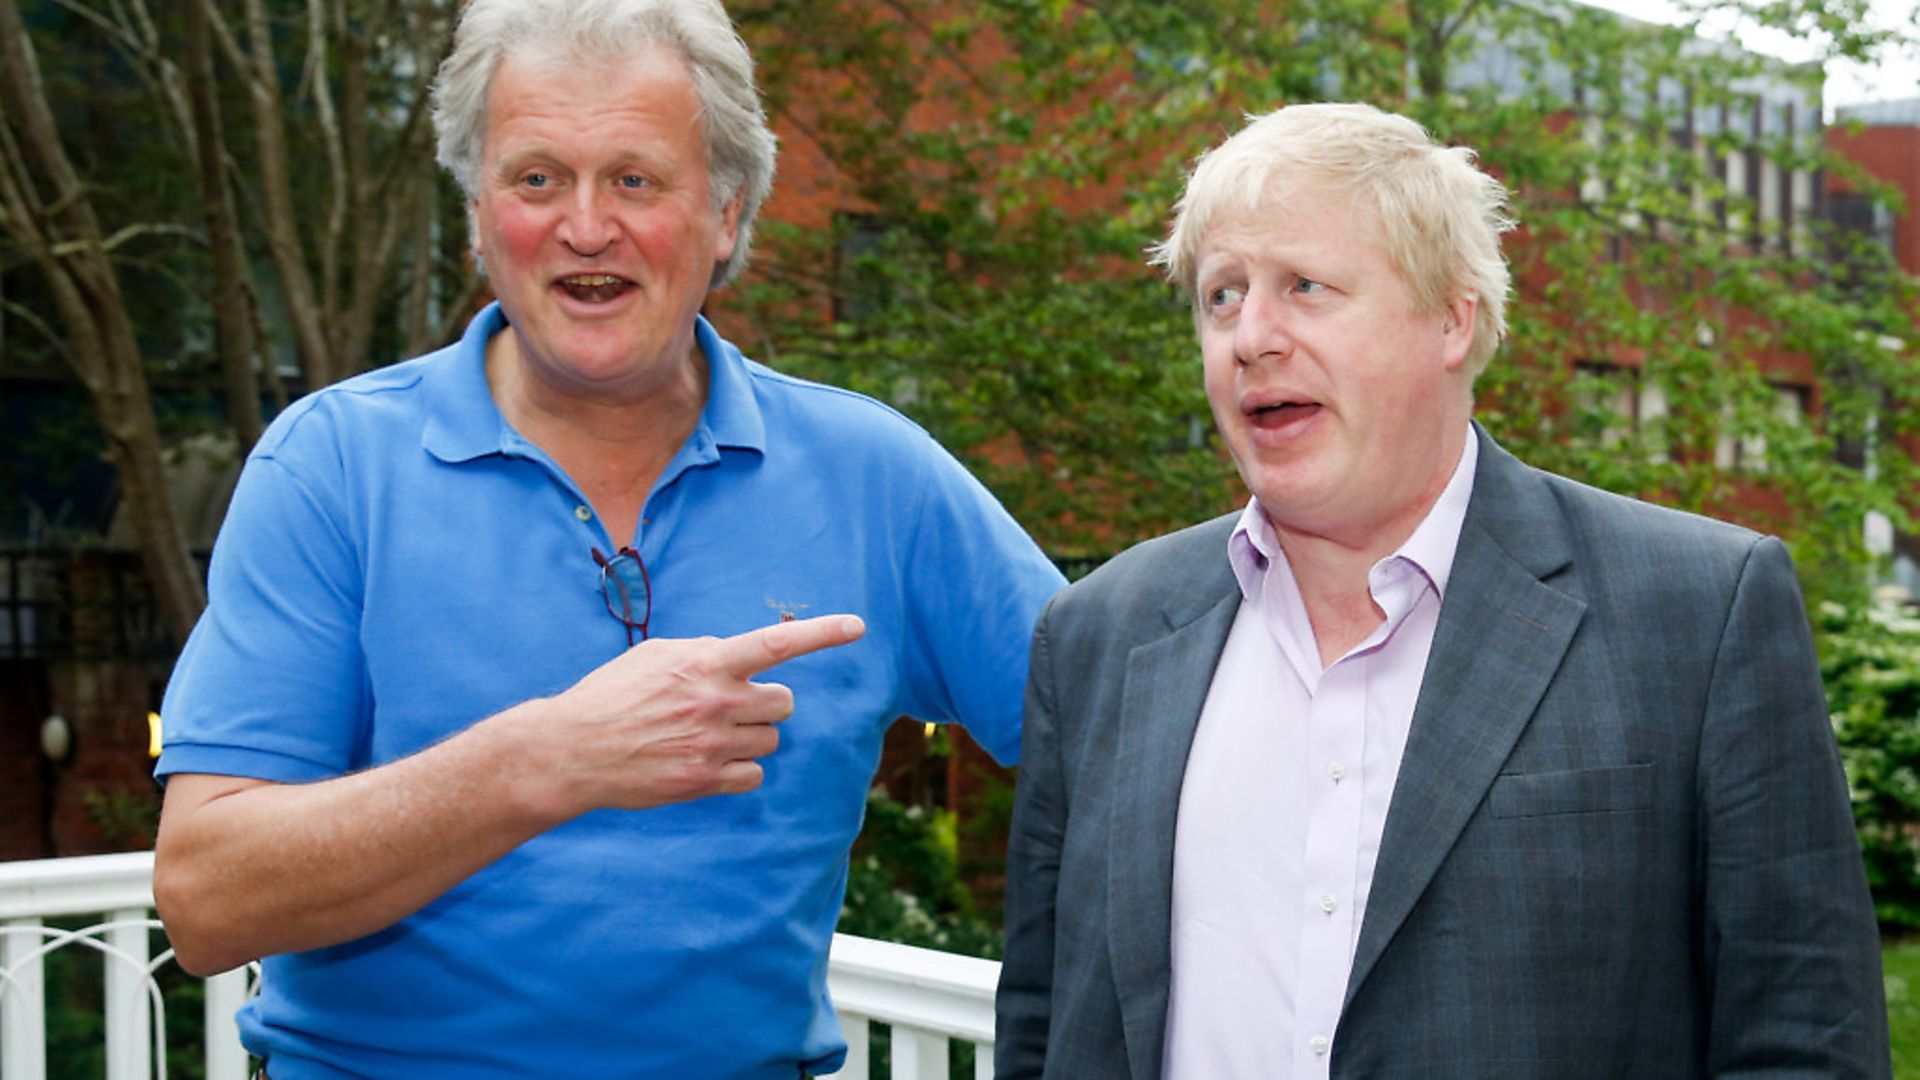 Tim Martin, chairman of JD Wetherspoon Plc, left, and Boris Johnson on the Vote Leave campaign trail. Photographer: Luke MacGregor/Bloomberg via Getty Images - Credit: Bloomberg via Getty Images